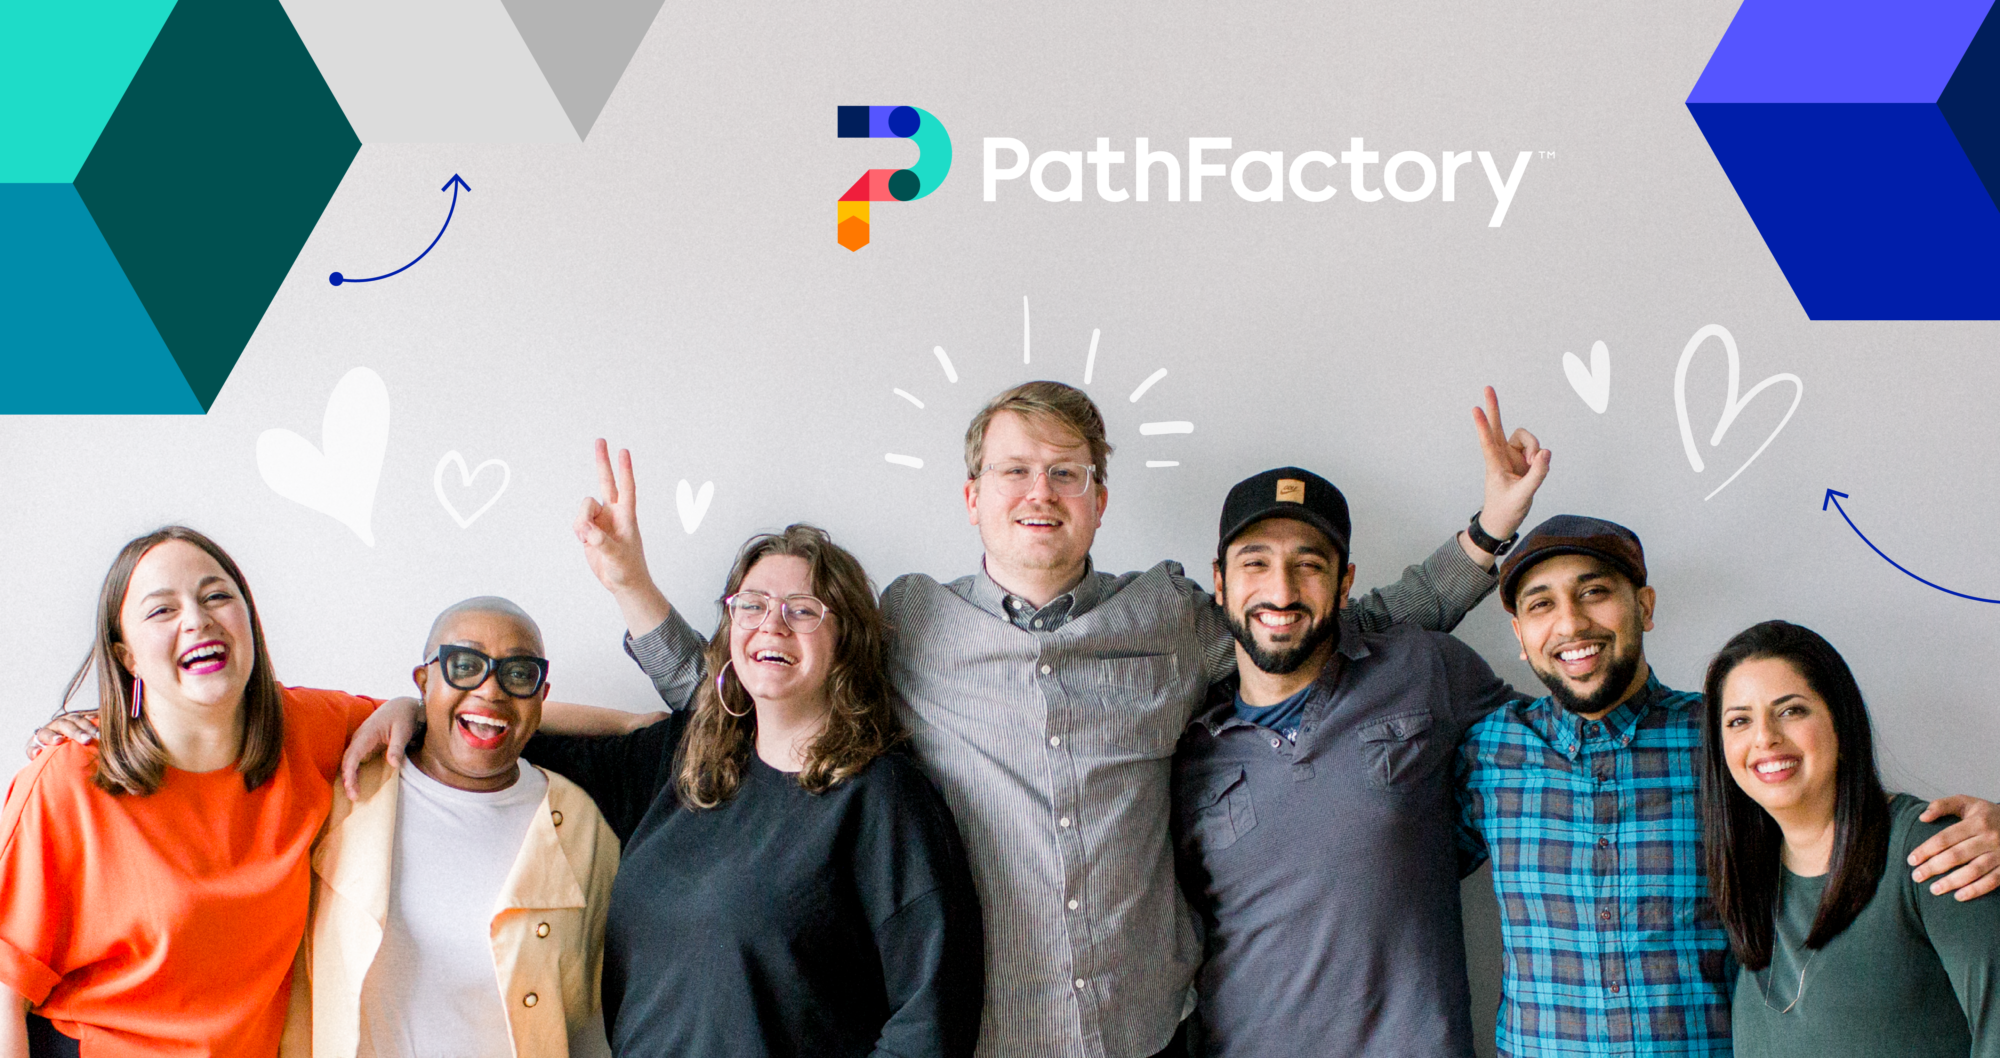 Header Image showing a ground of 7 people from the PathFactory Team smiling at at the camera. Above the group is PathFactory's logo and some colourful shapes on a light grey background.